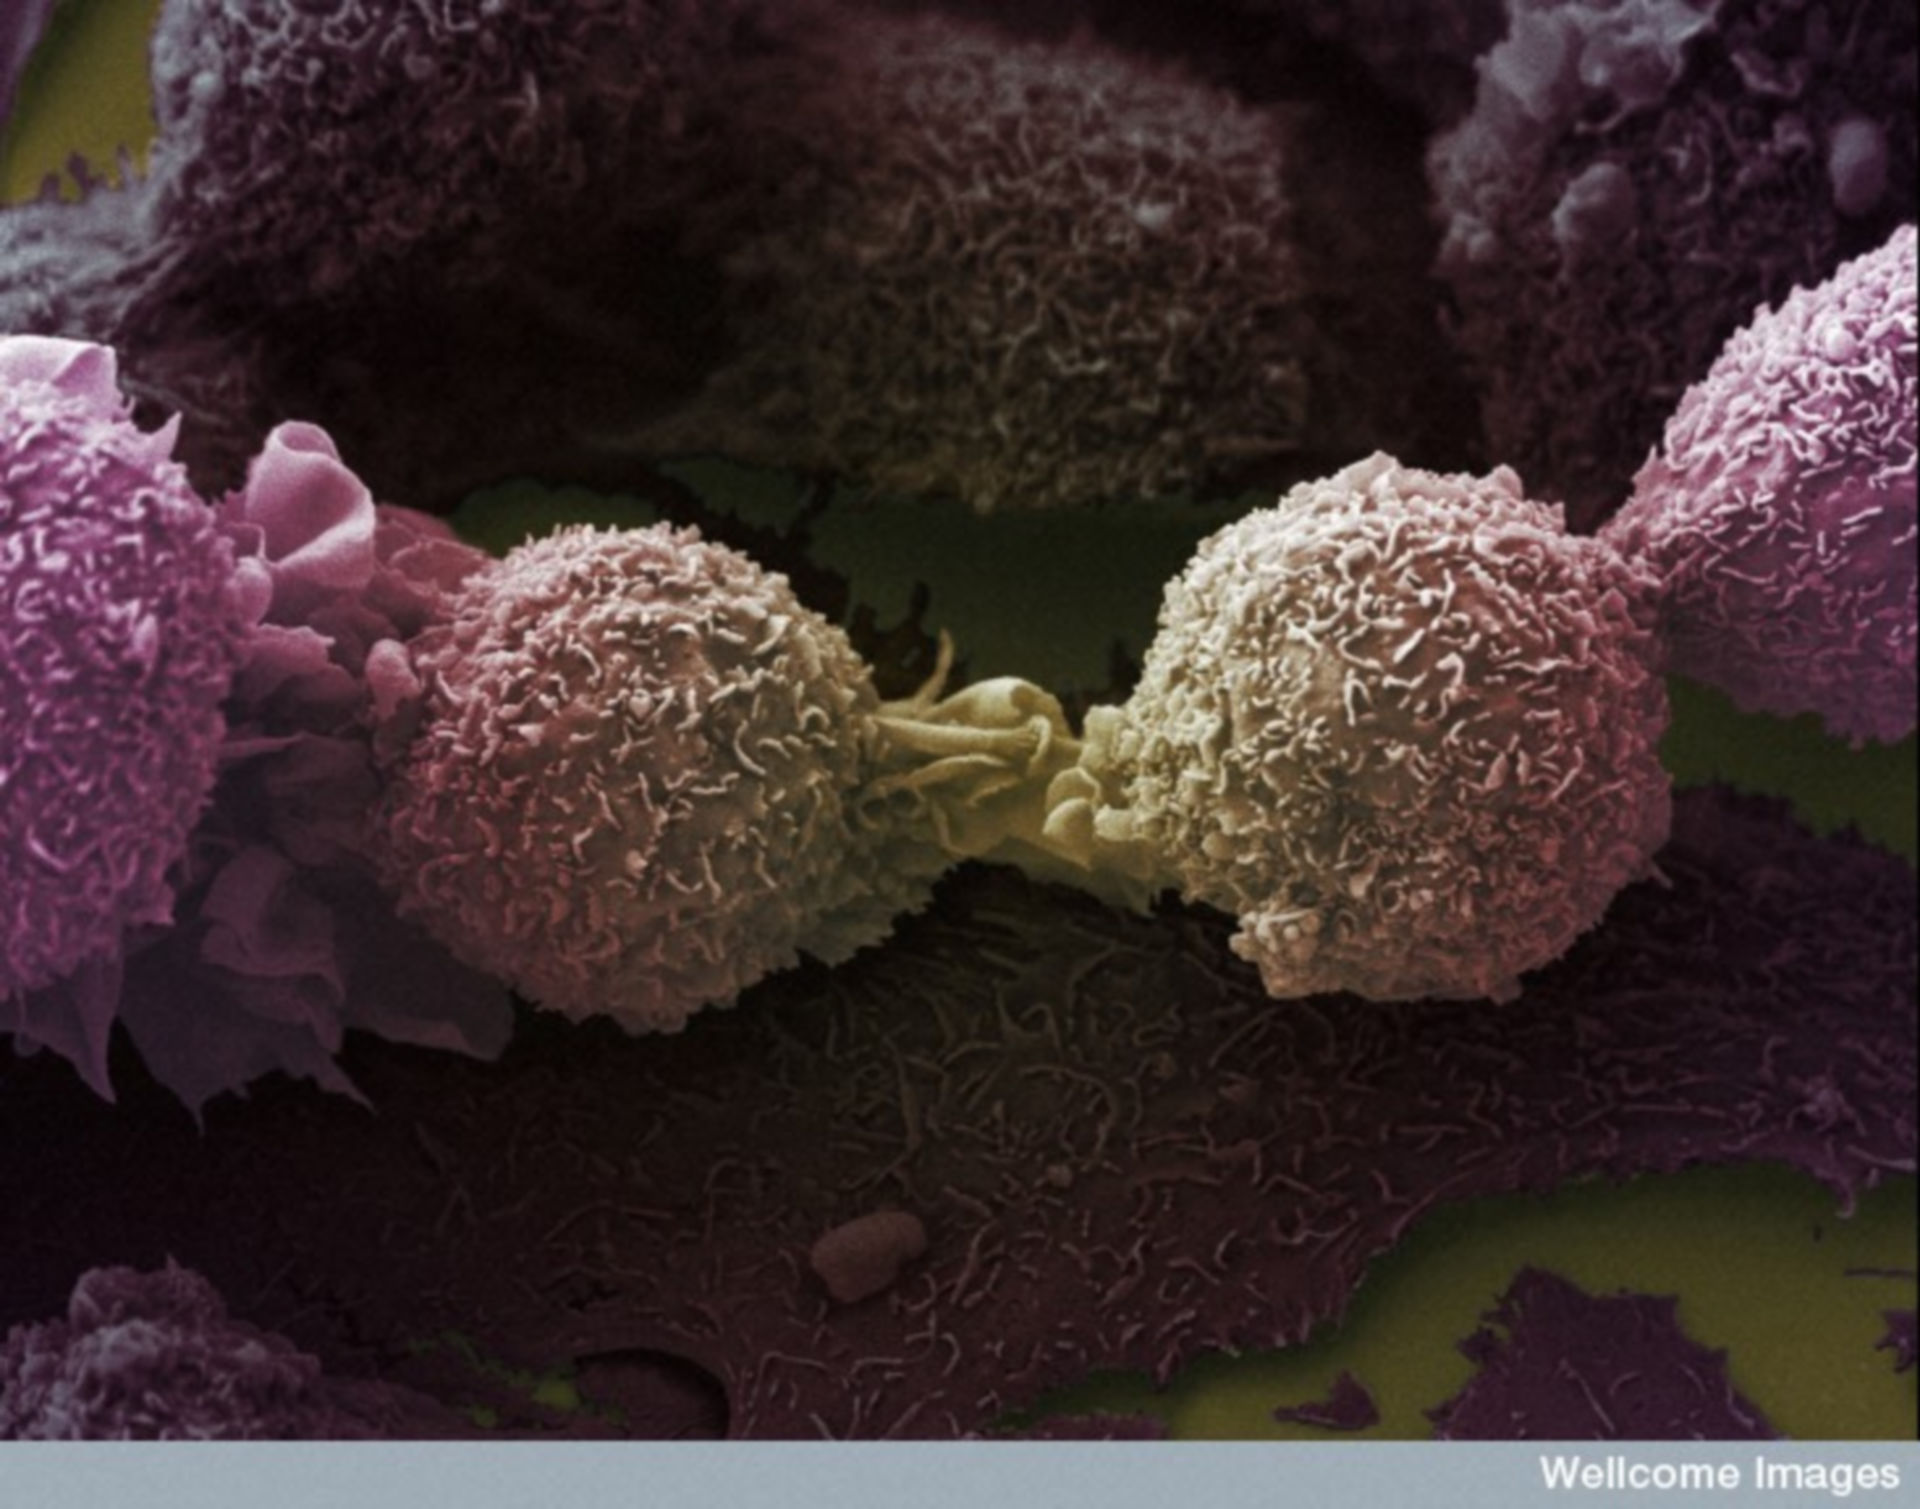 Find this and other great images in the Technology Networks new The Spectacular World of Cancer Cell Imaging Flipbook. Image of the Week – February 11, 2019 - CIL:39107 - http://www.cellimagelibrary.org/images/39107